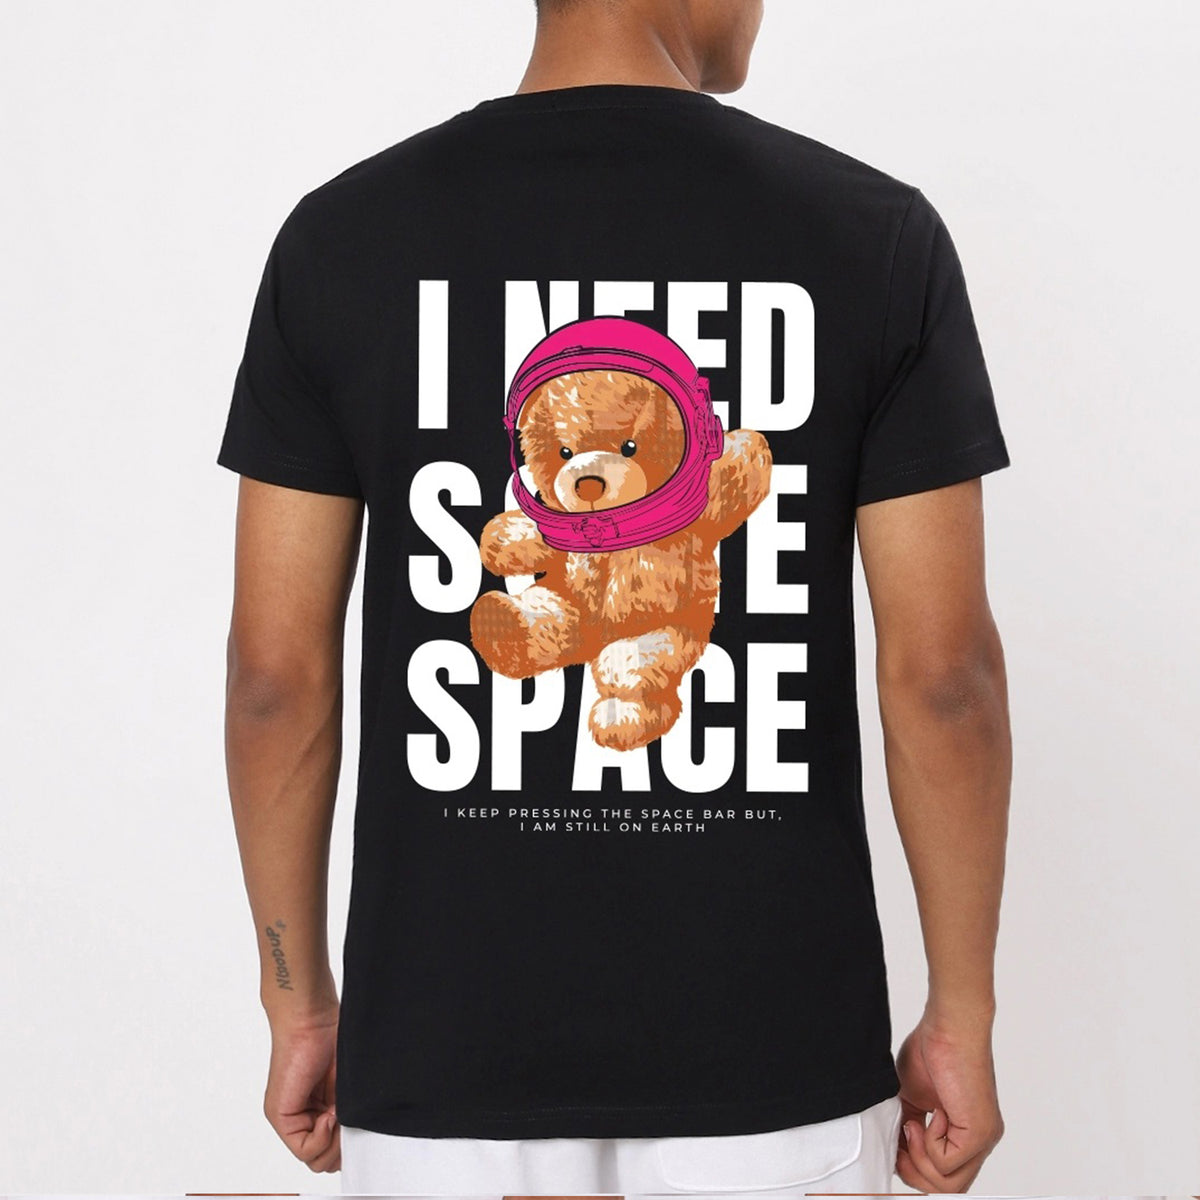 Men's Black Need Space Teddy Graphic Printed Oversized T-shirt